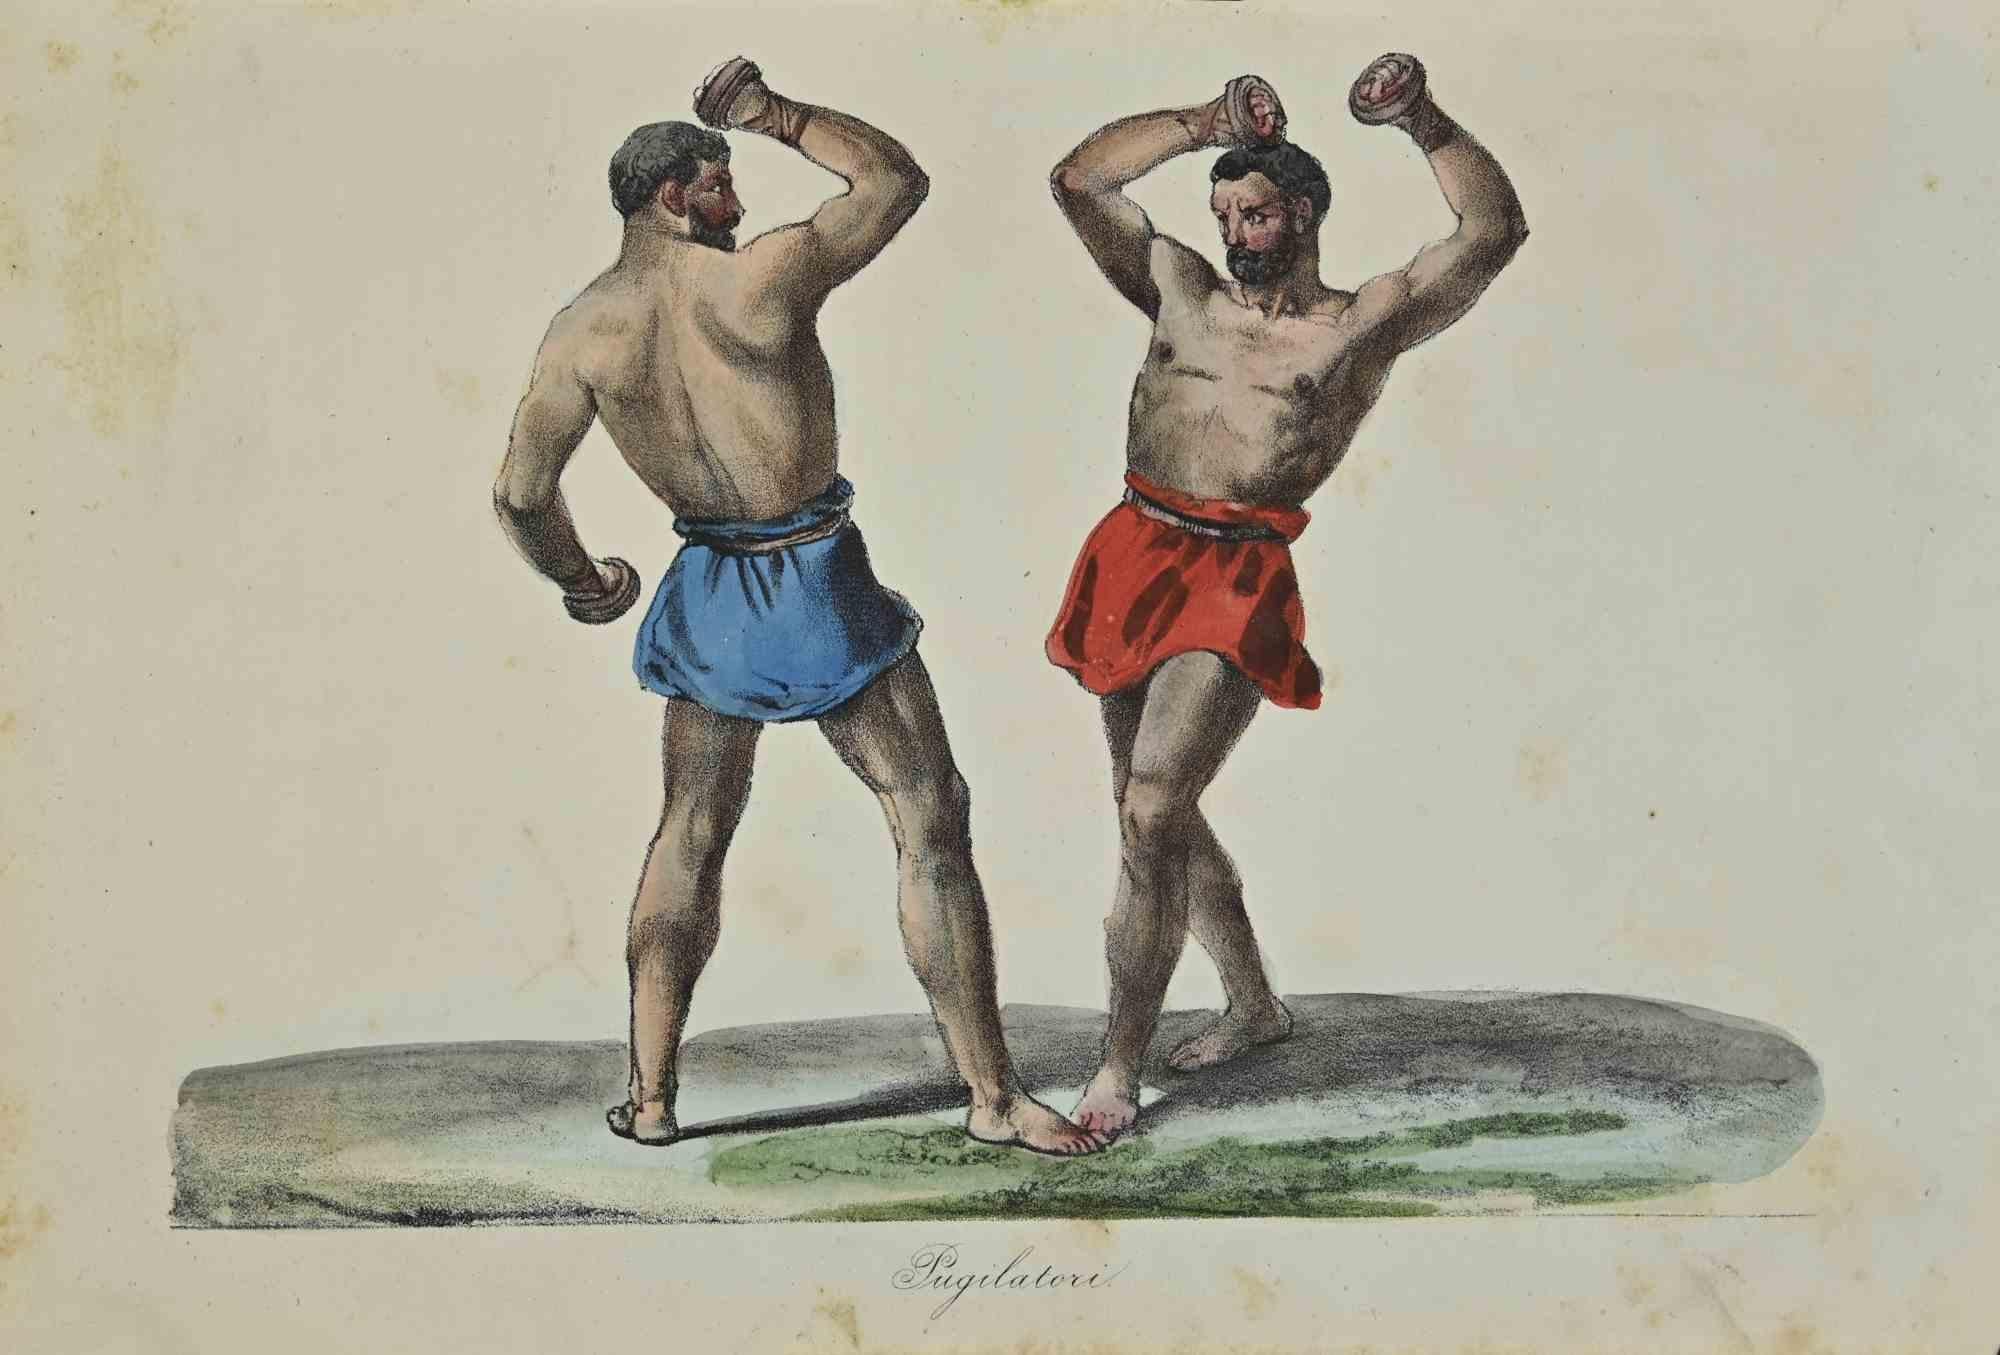 Various Artists Figurative Print - Uses and Customs - Boxers - Lithograph - 1862